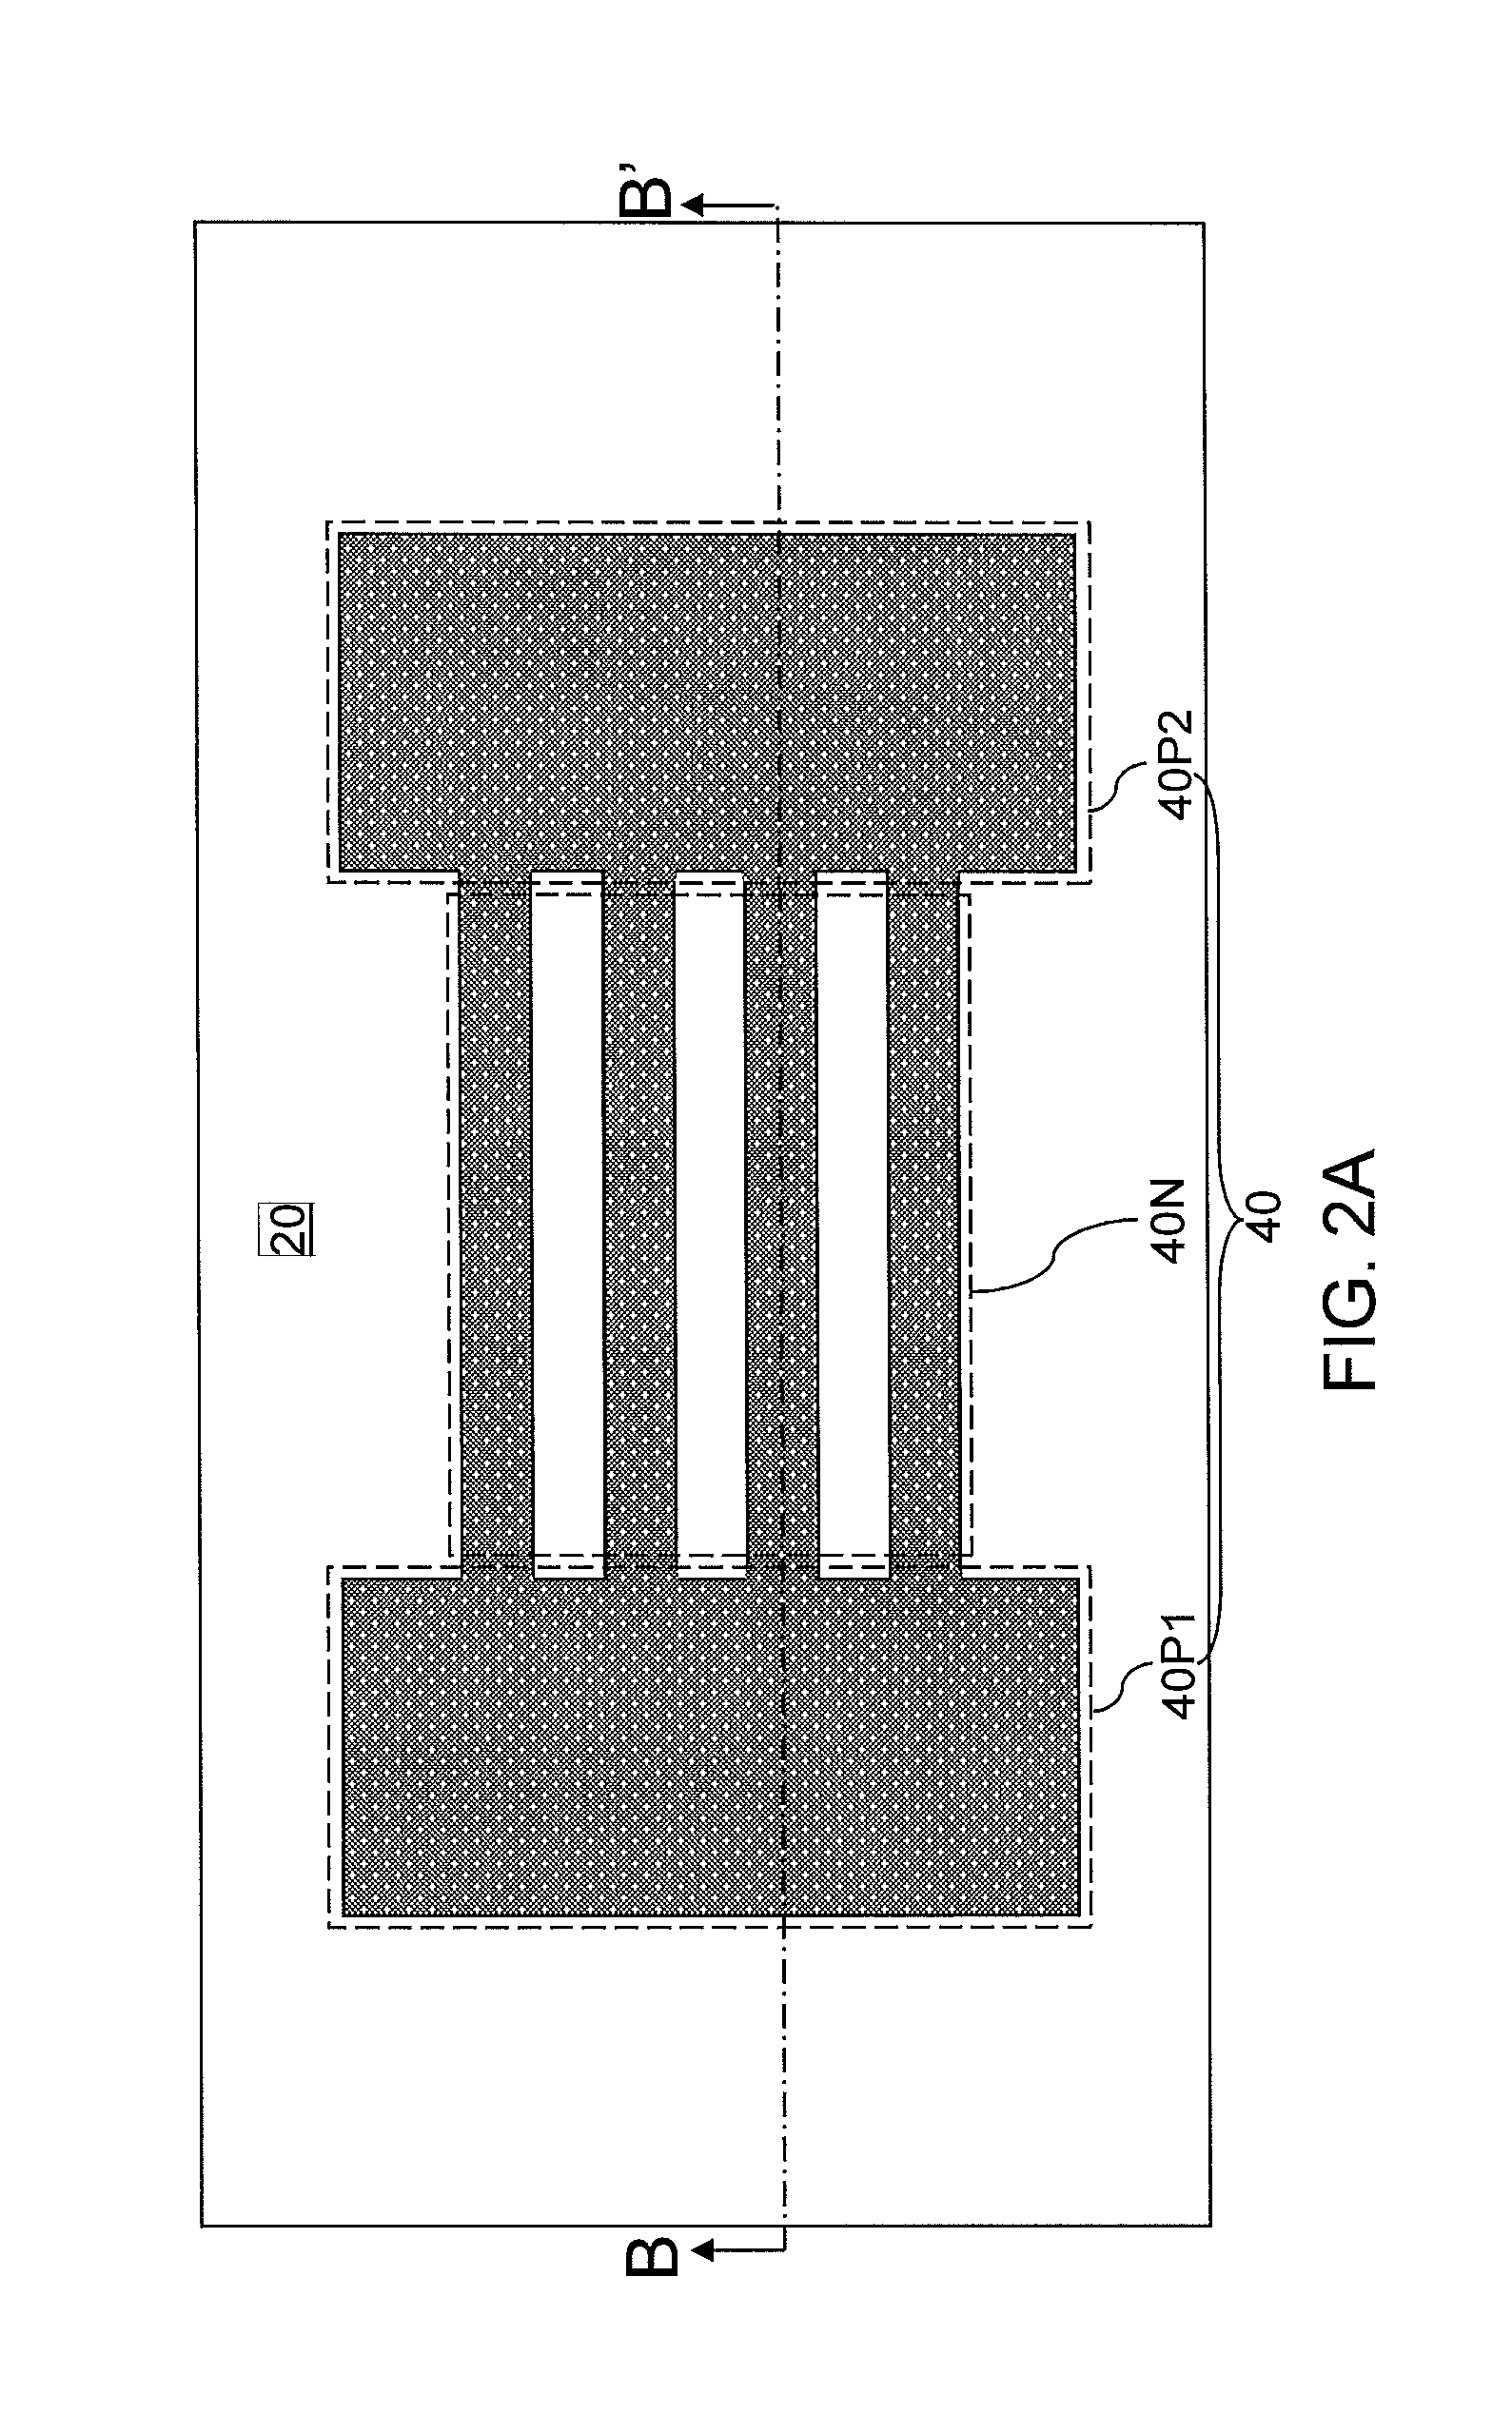 Non-replacement gate nanomesh field effect transistor with pad regions